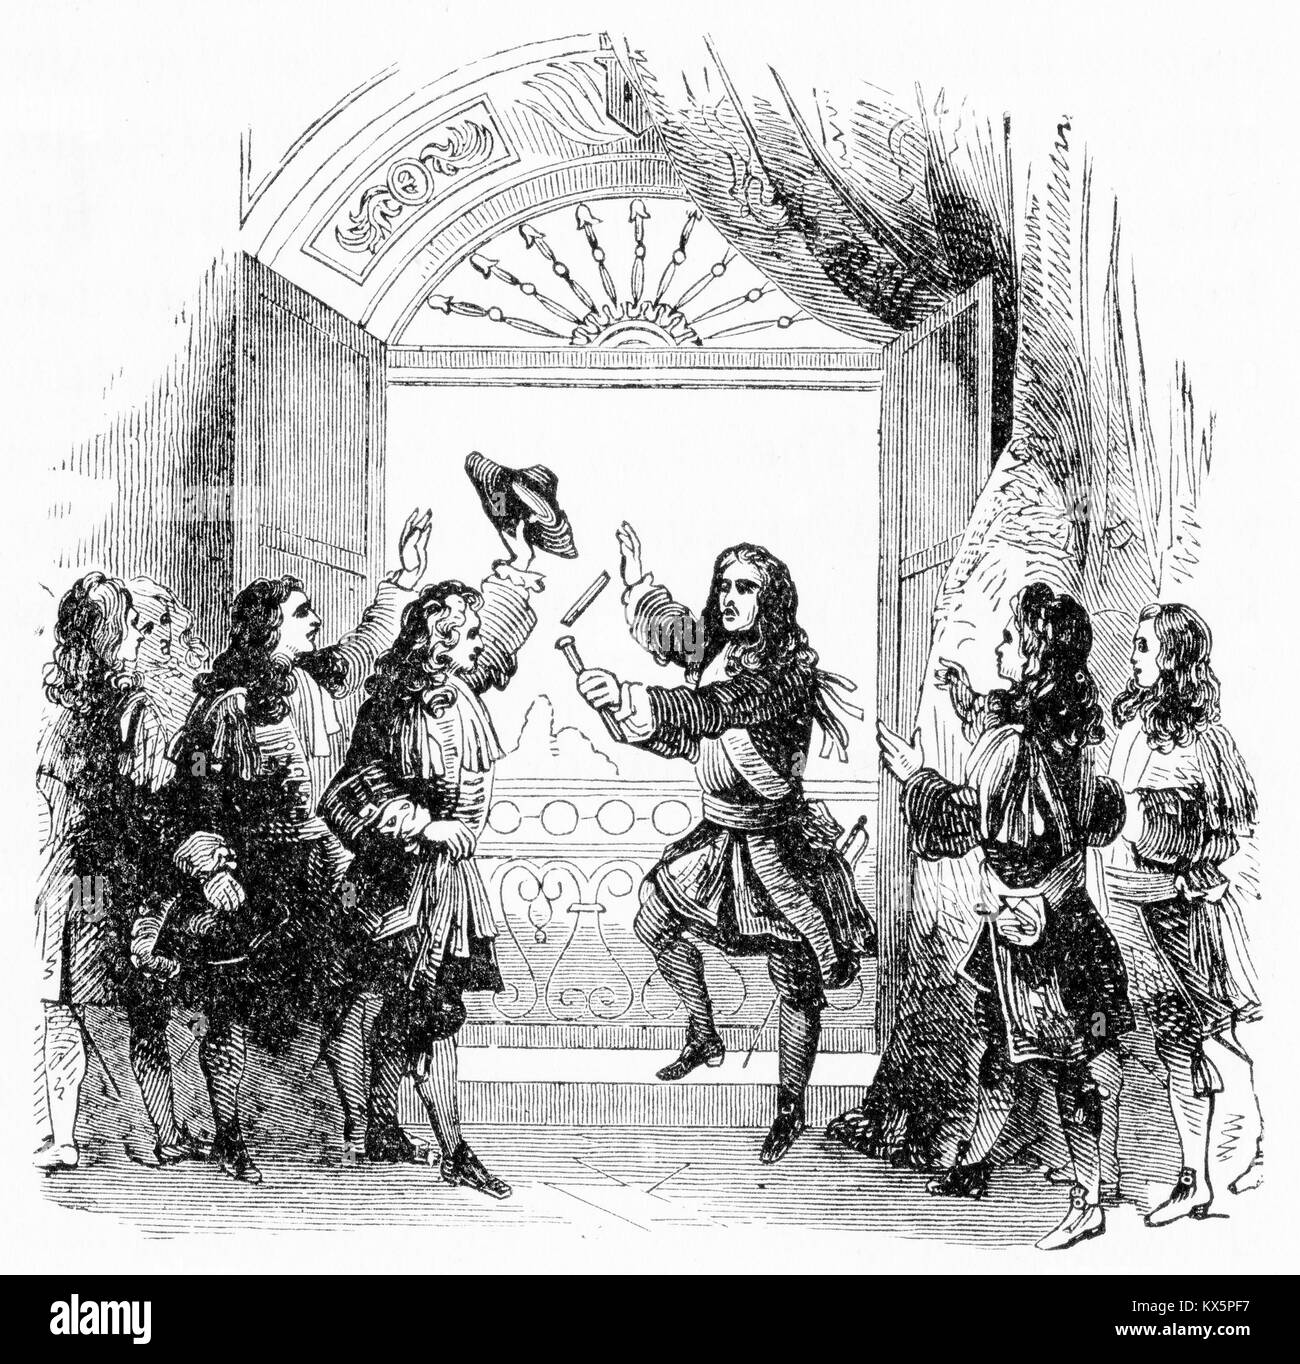 Engraving of courtiers rejoicing at news of the death of Louis XIV in 1715. From Louis XIV by Jacob Abbott, 1901 Stock Photo